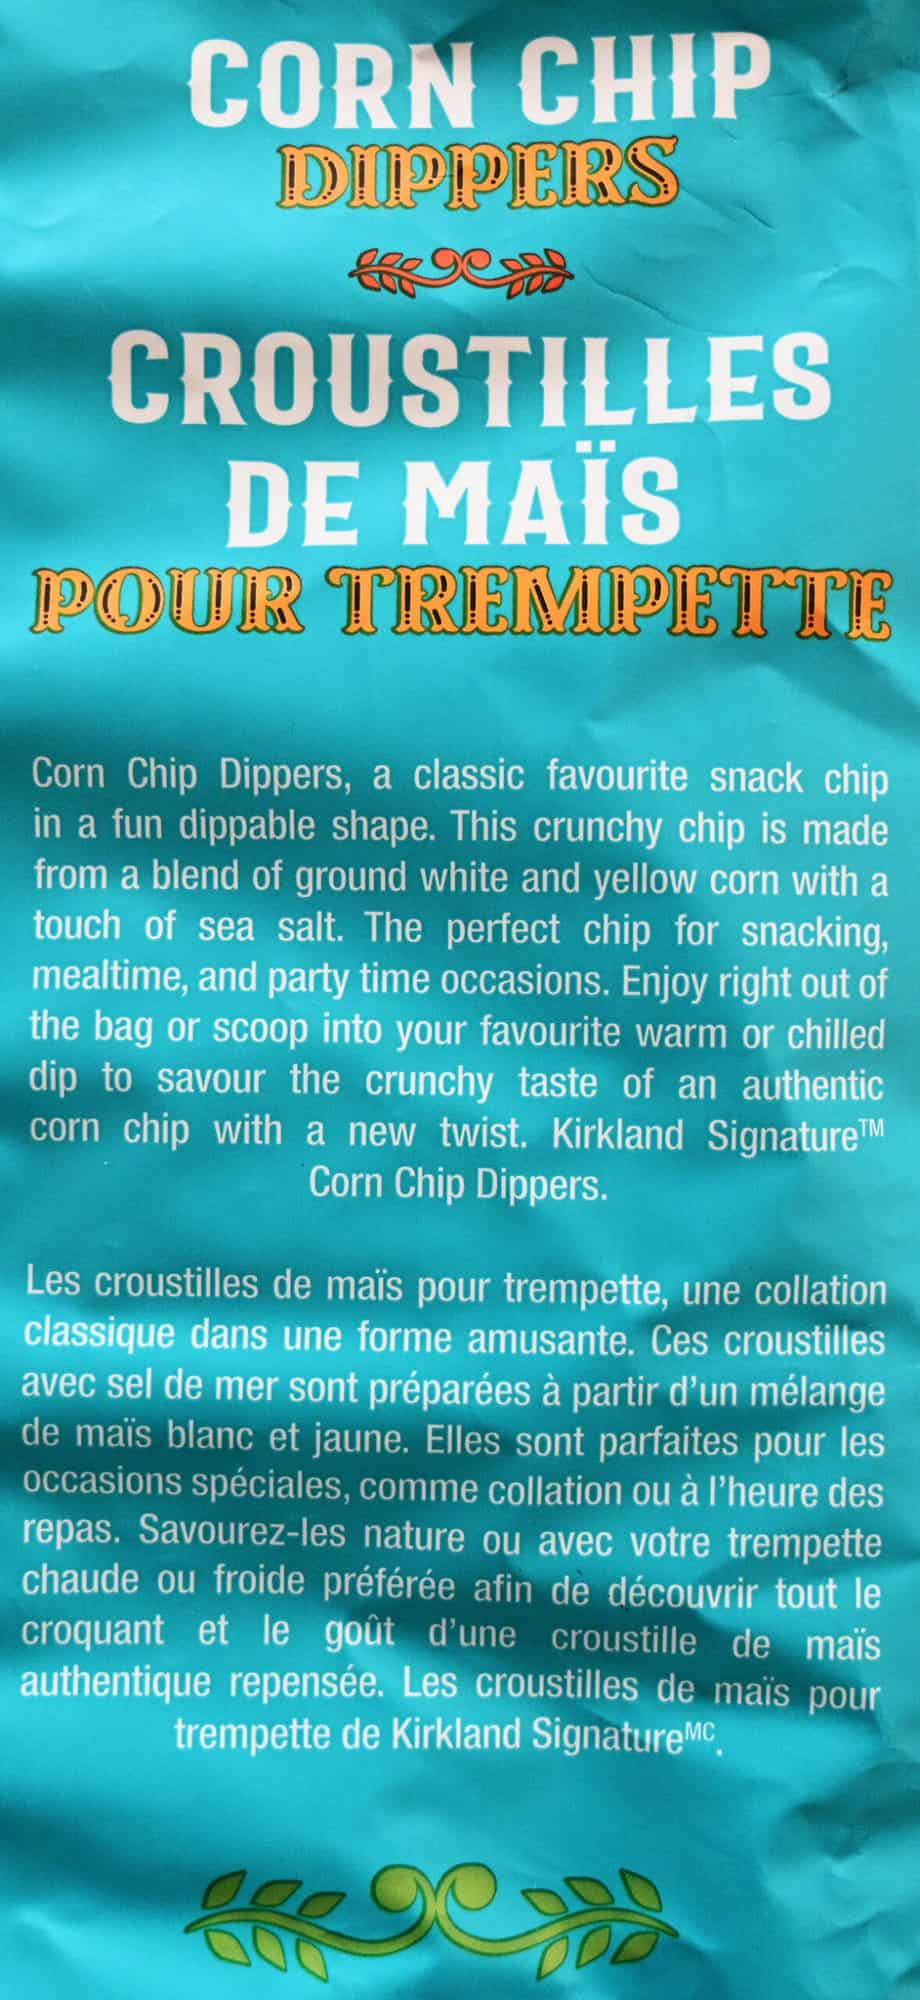 Product description from the back of the bag.